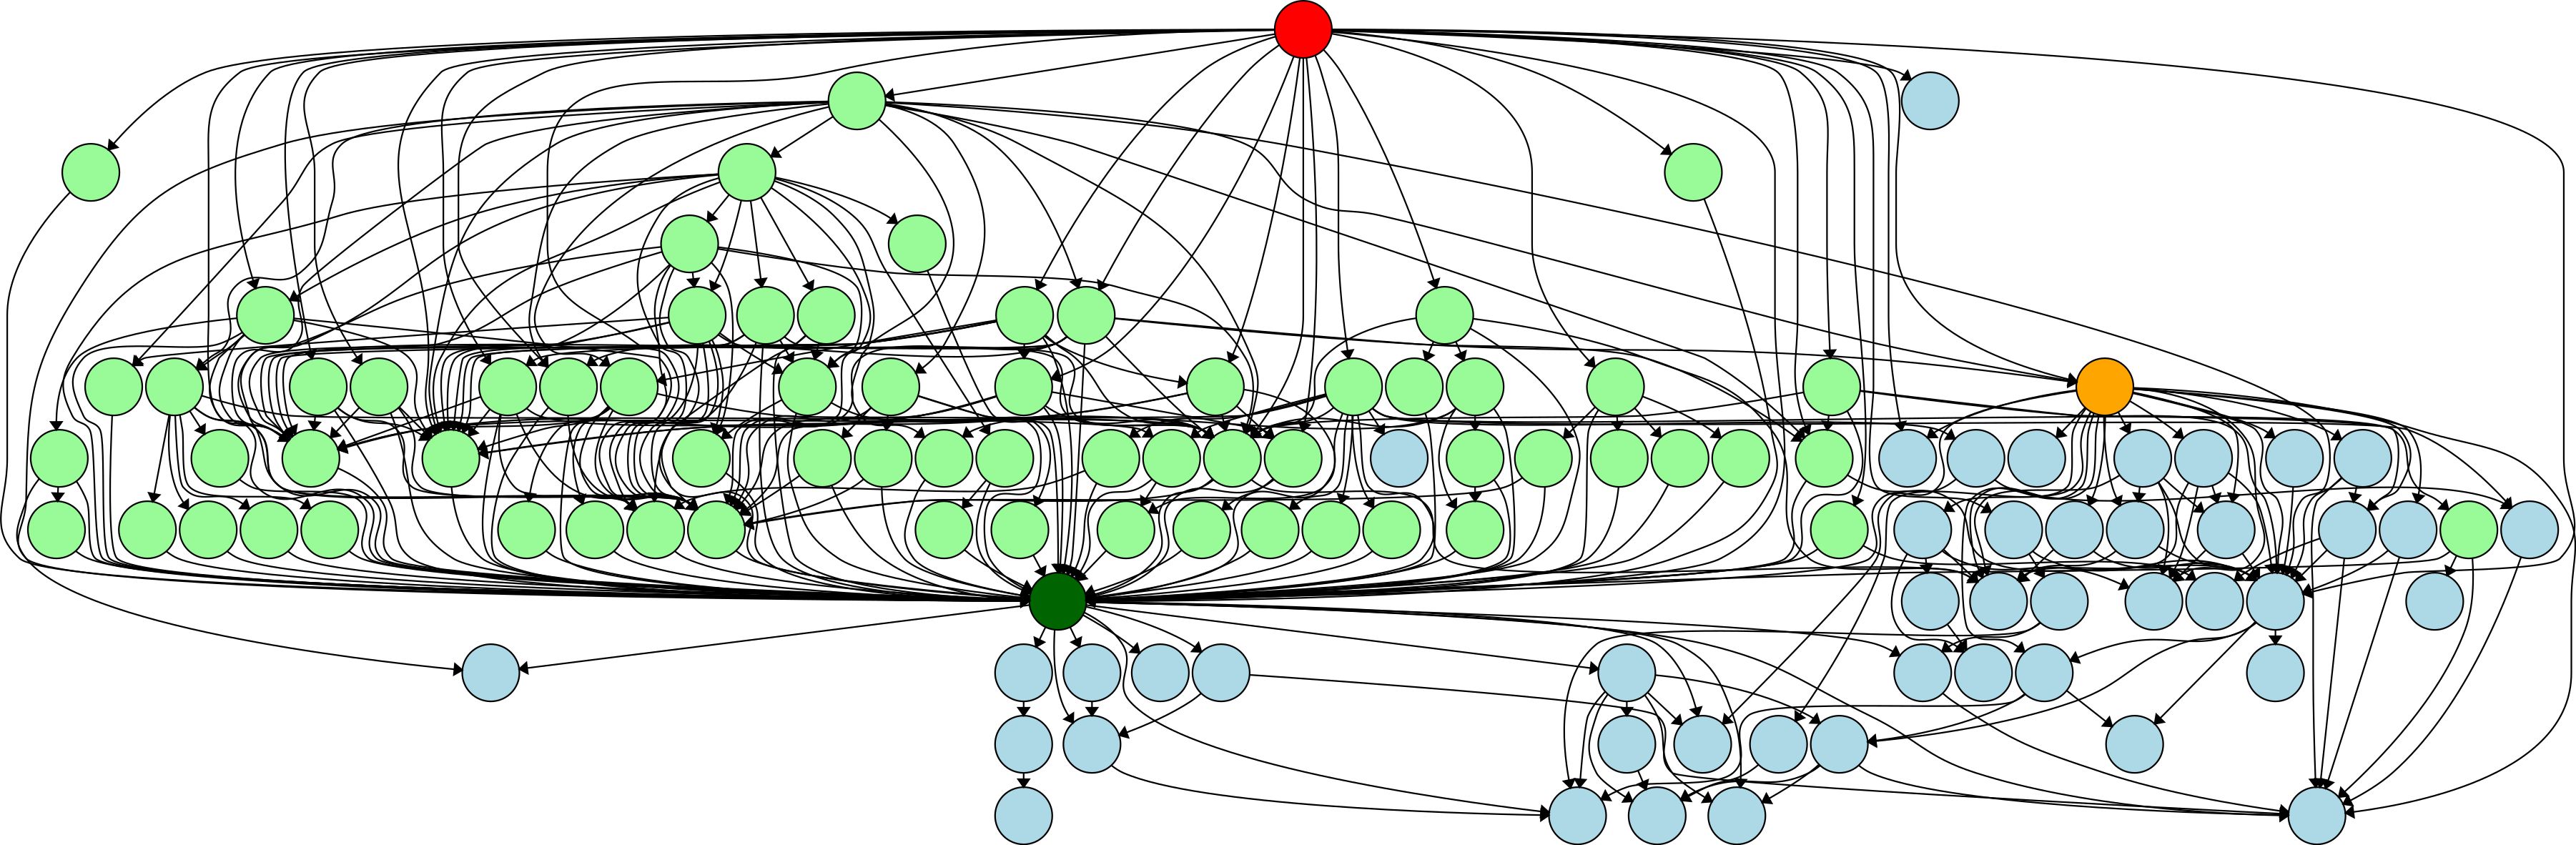 A directed graph showing the complexity of Firedrake’s dependencies